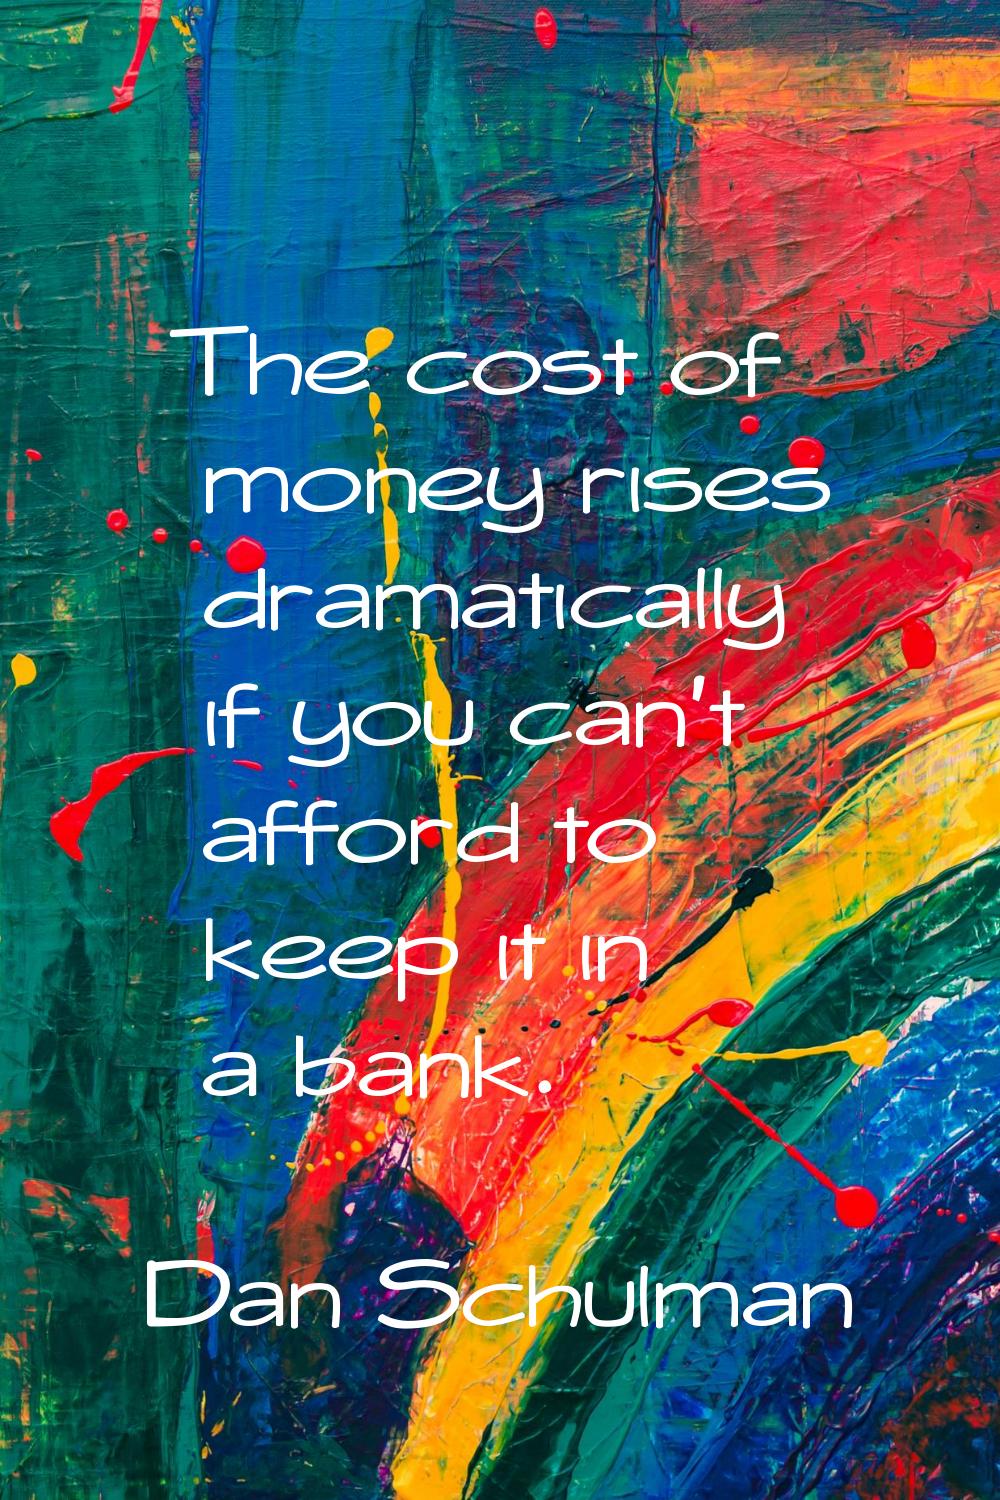 The cost of money rises dramatically if you can't afford to keep it in a bank.